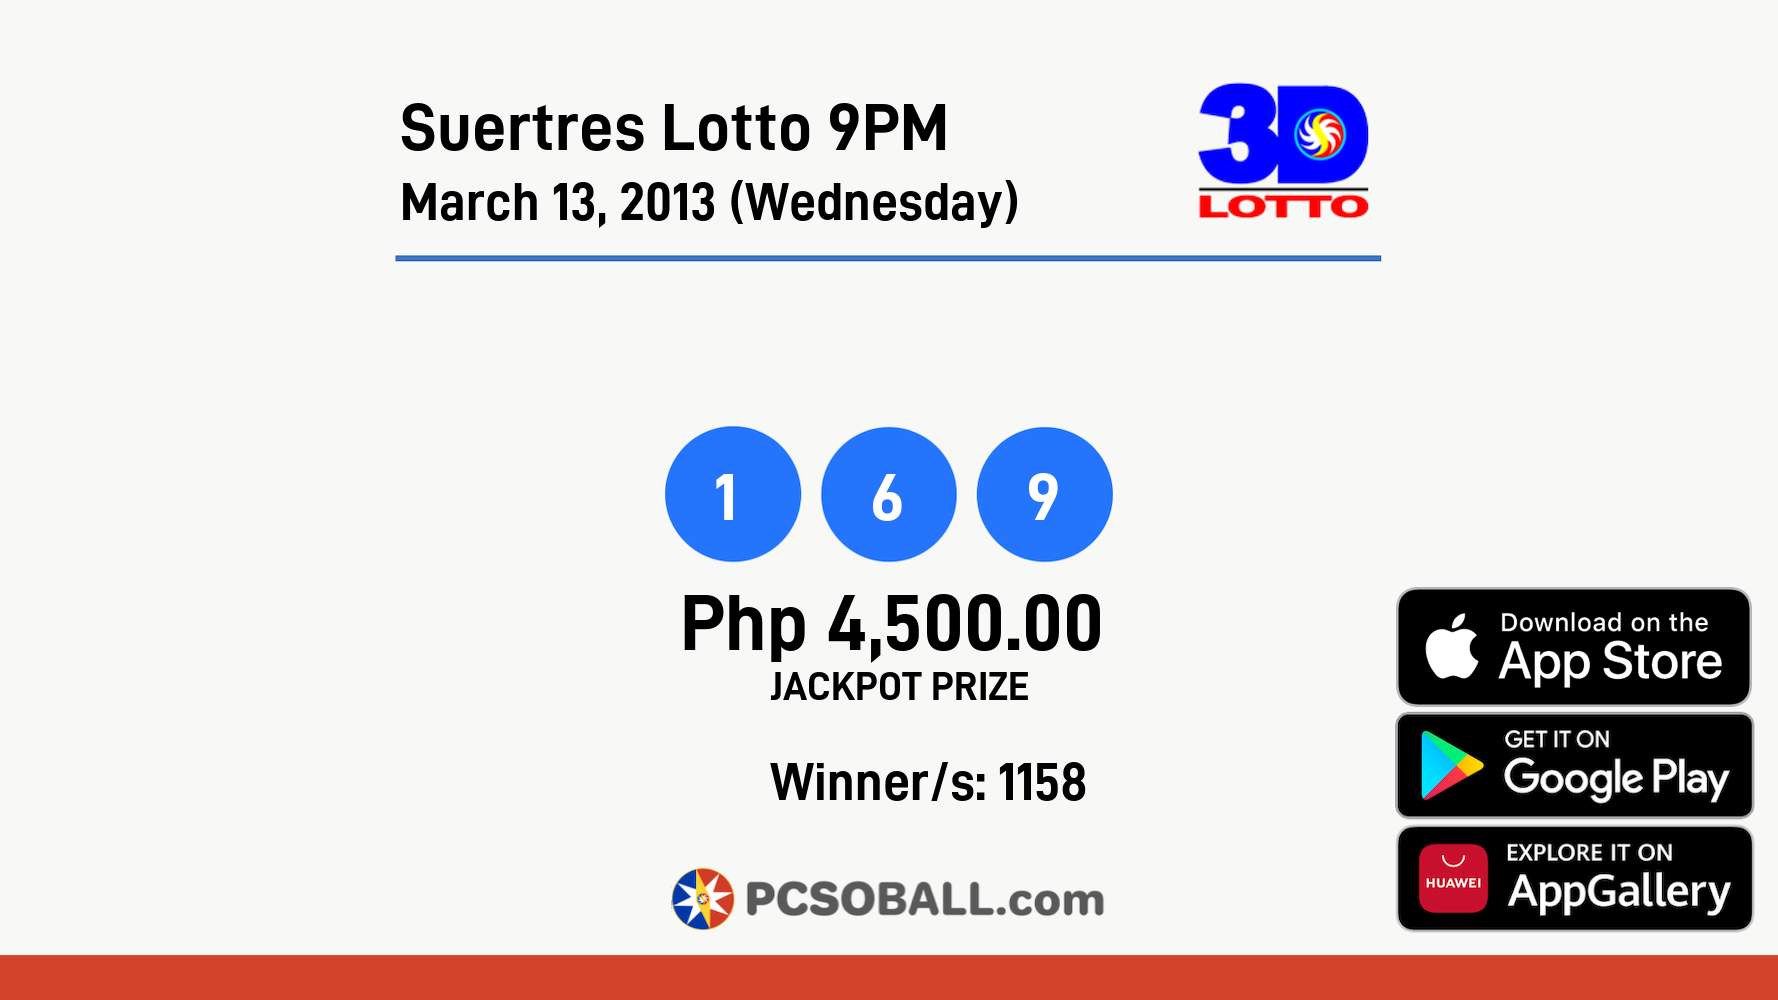 Suertres Lotto 9PM March 13, 2013 (Wednesday) Result